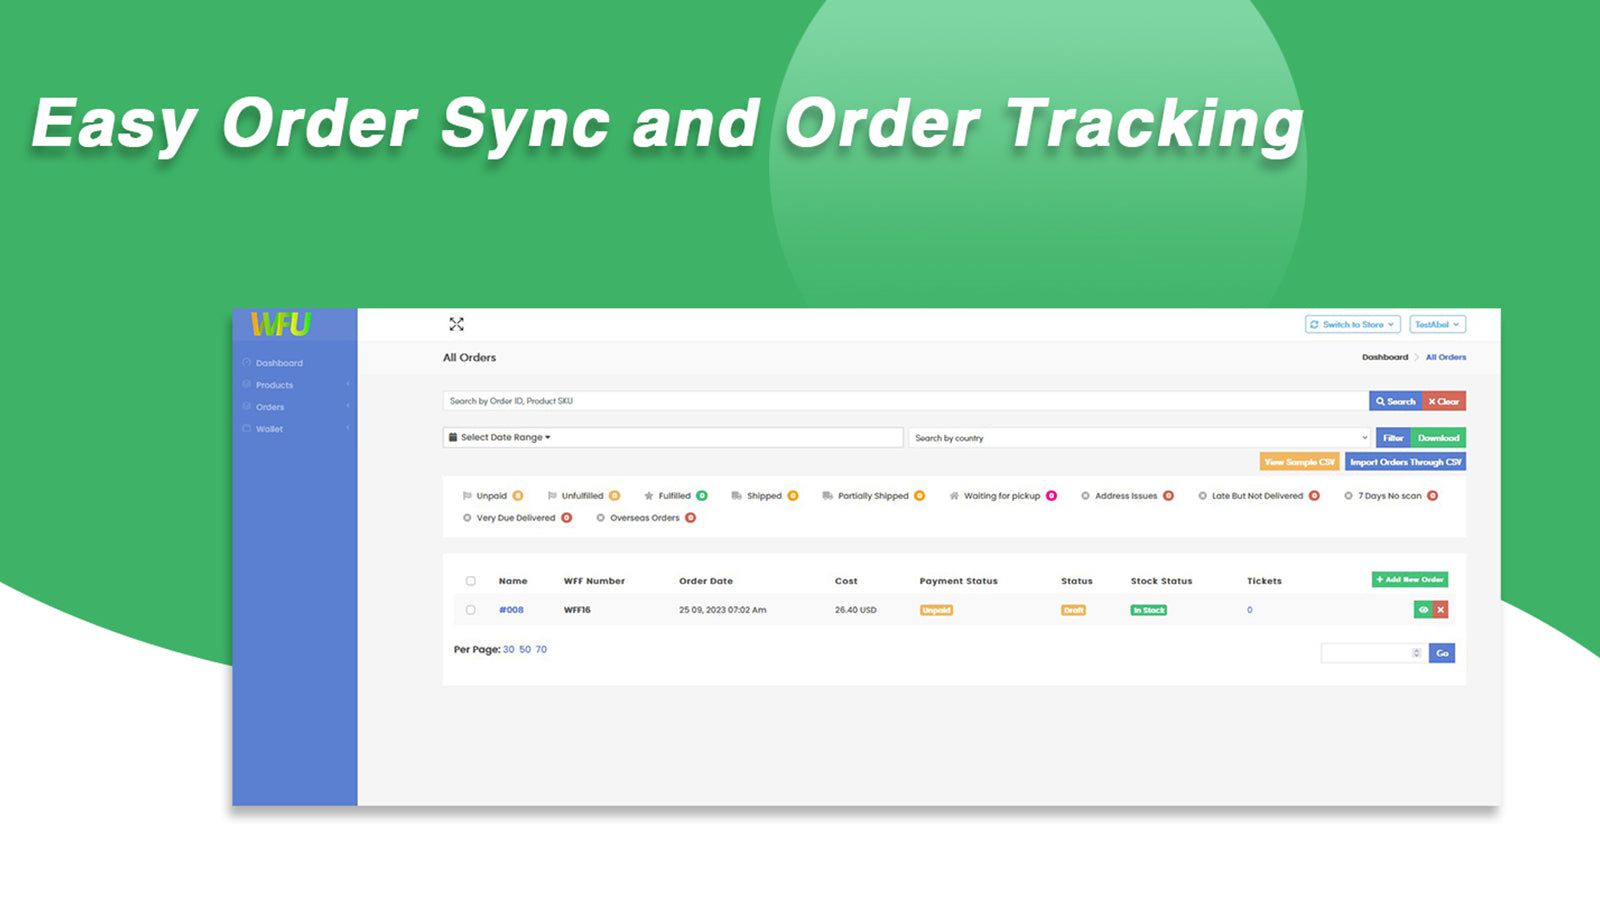 Easy Order Sync and Order Tracking